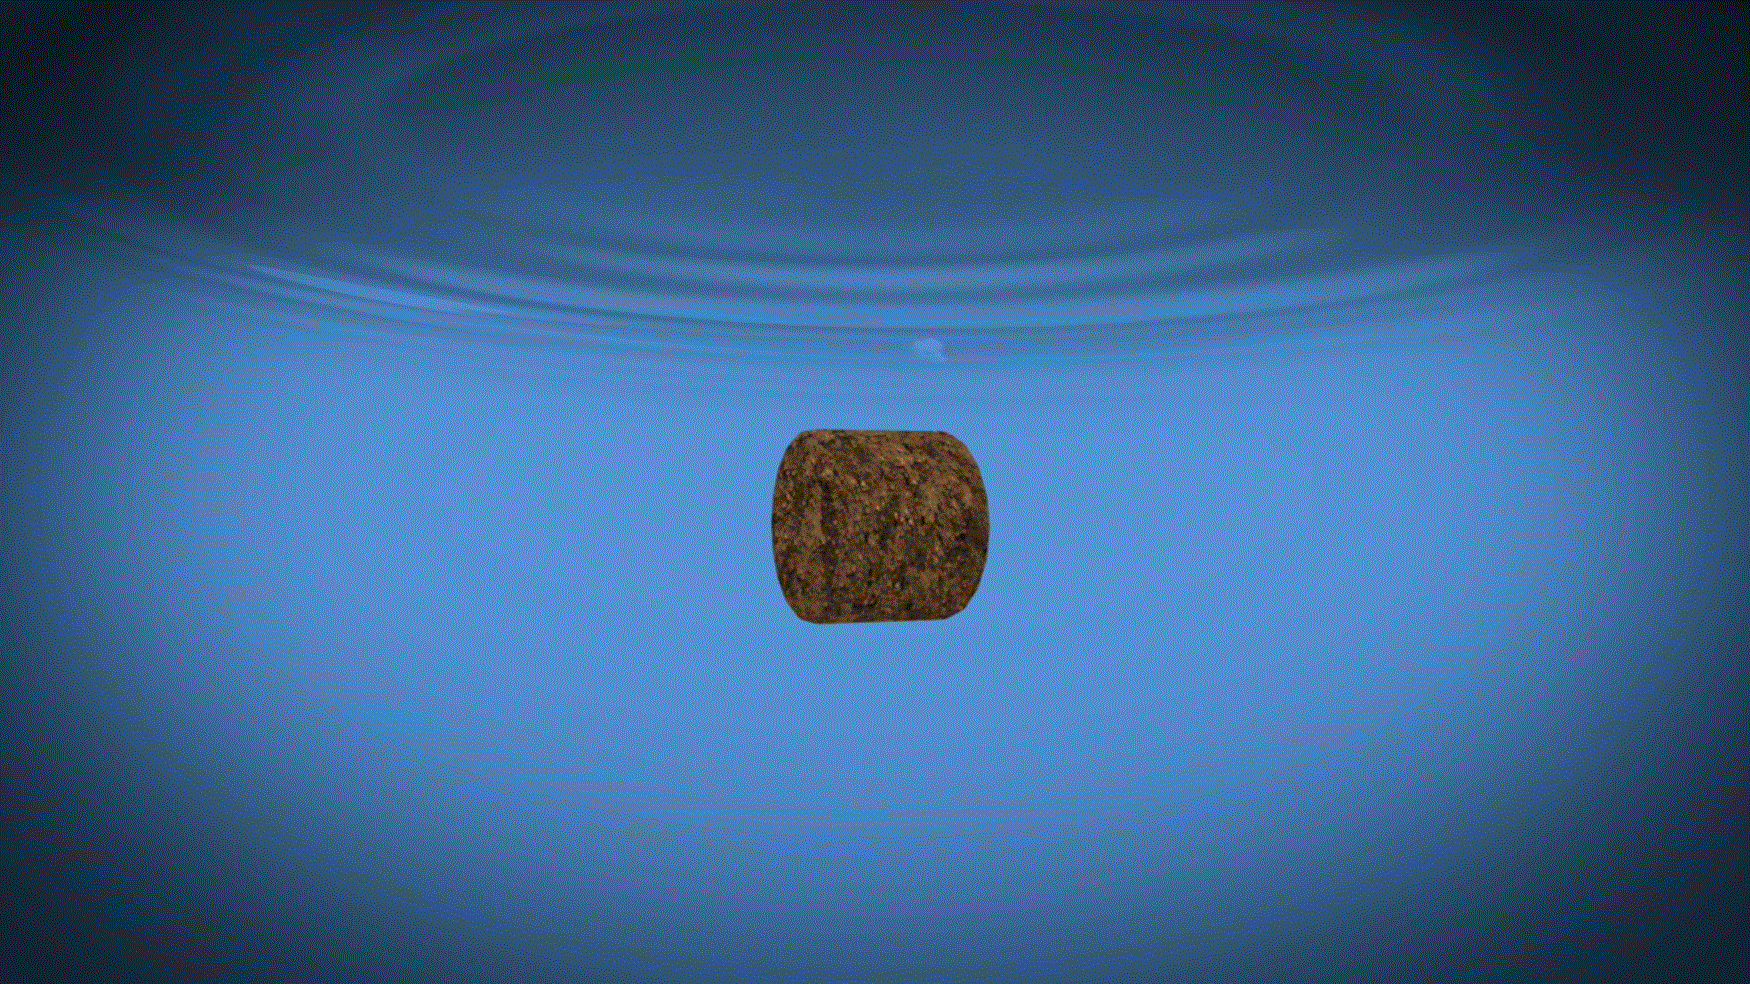 A gif of a feed pellet bobbing just under the water surface